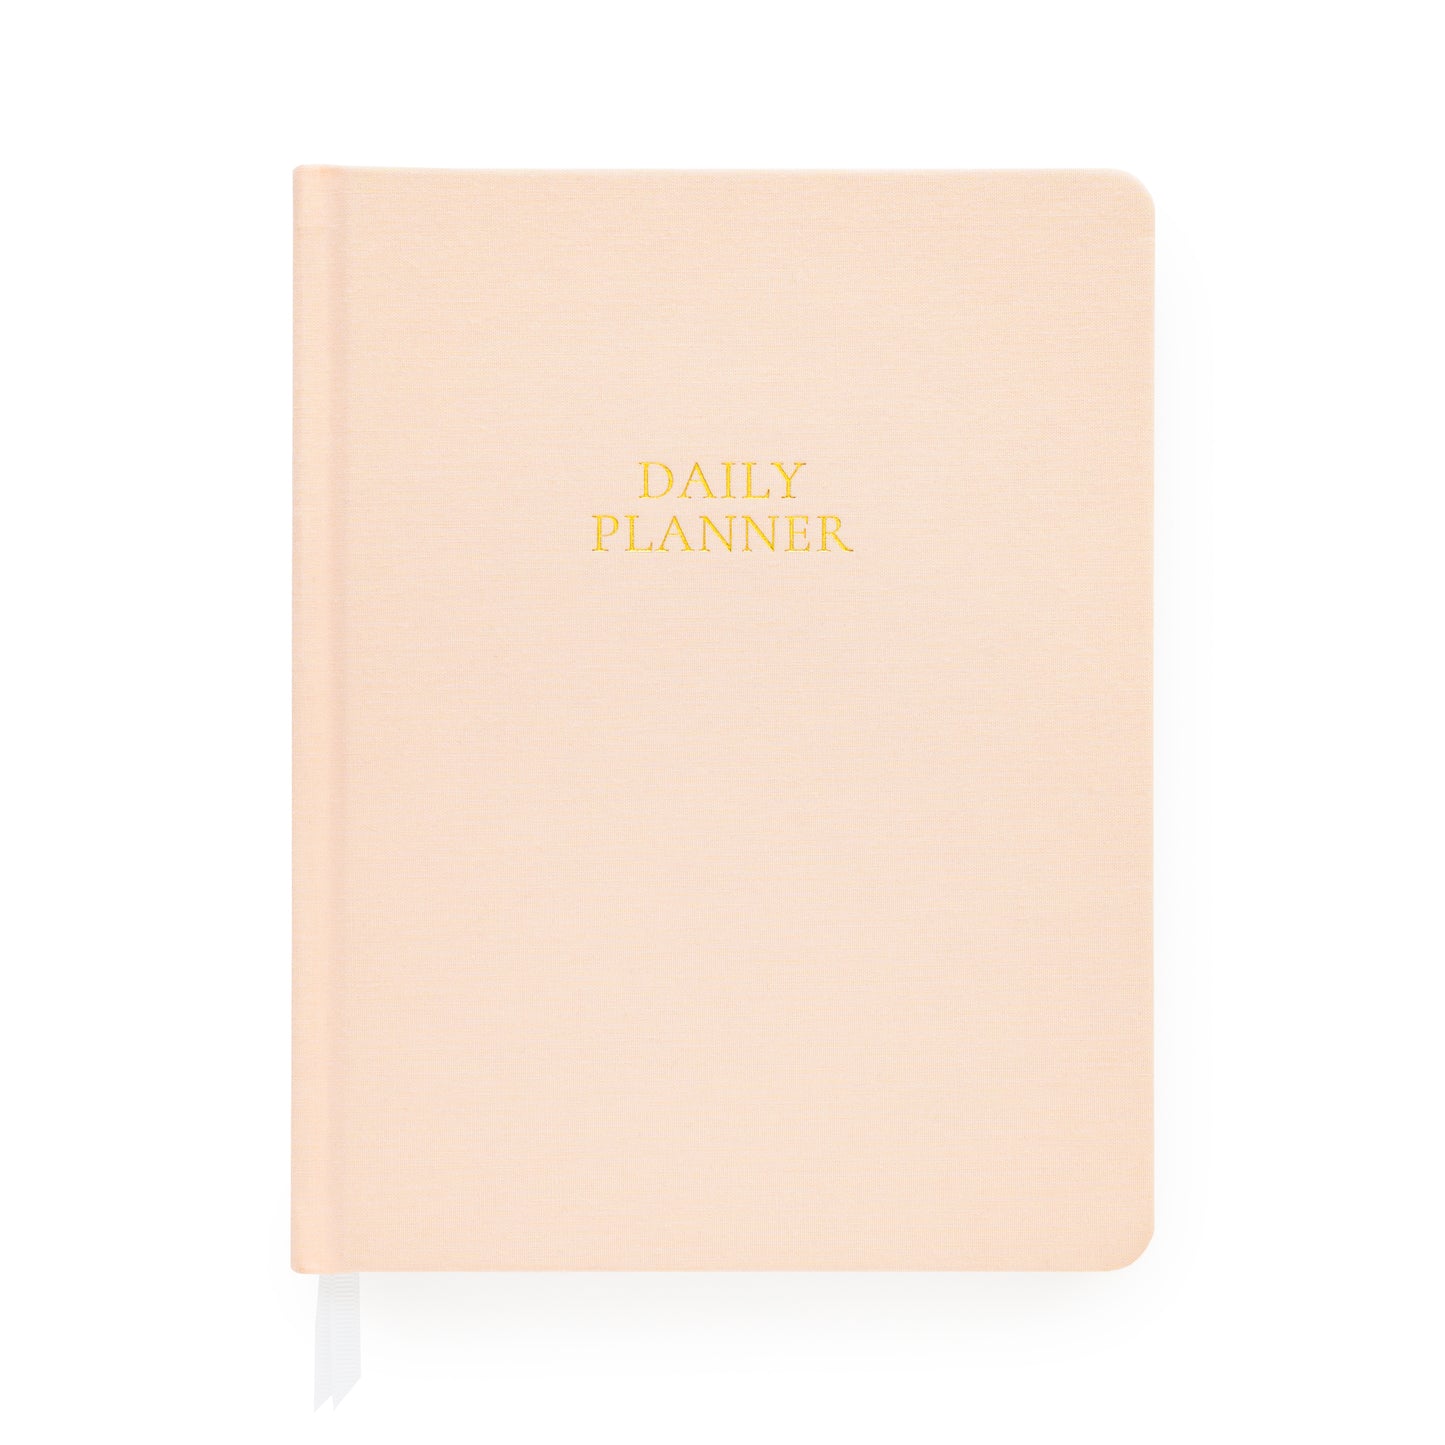 Pale pink daily planner